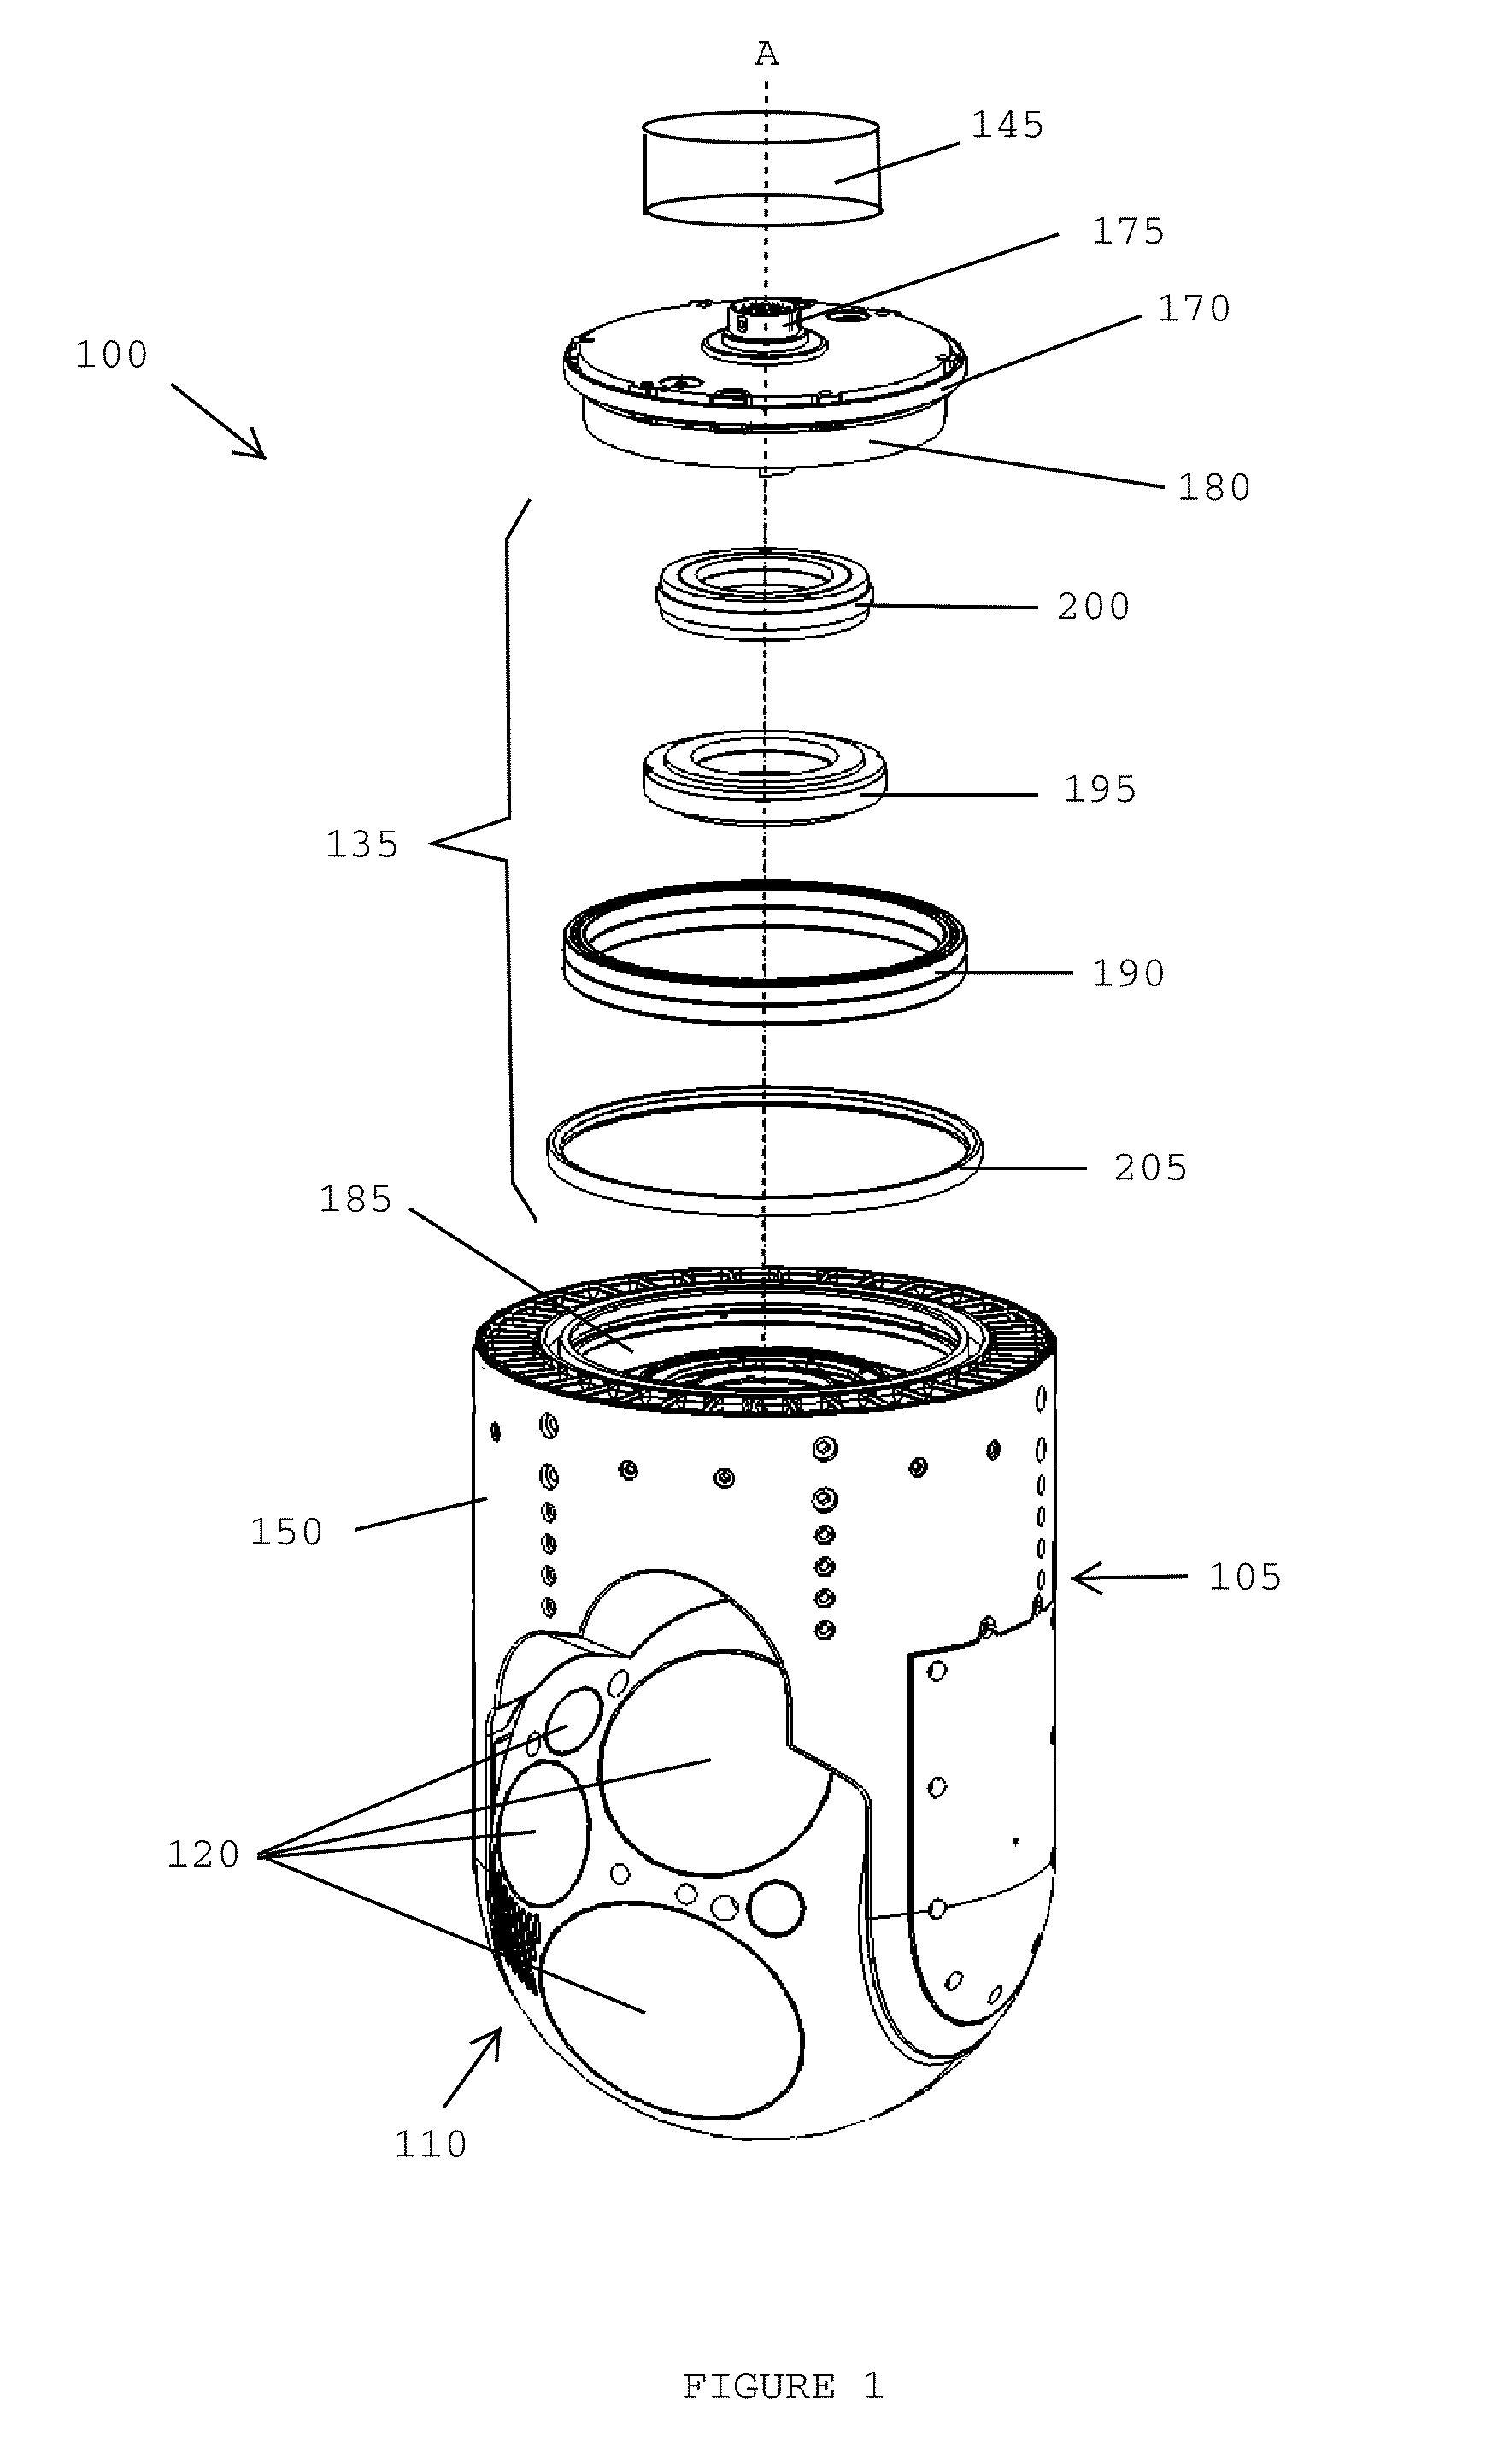 Optical Payload with Folded Telescope and Cryocooler